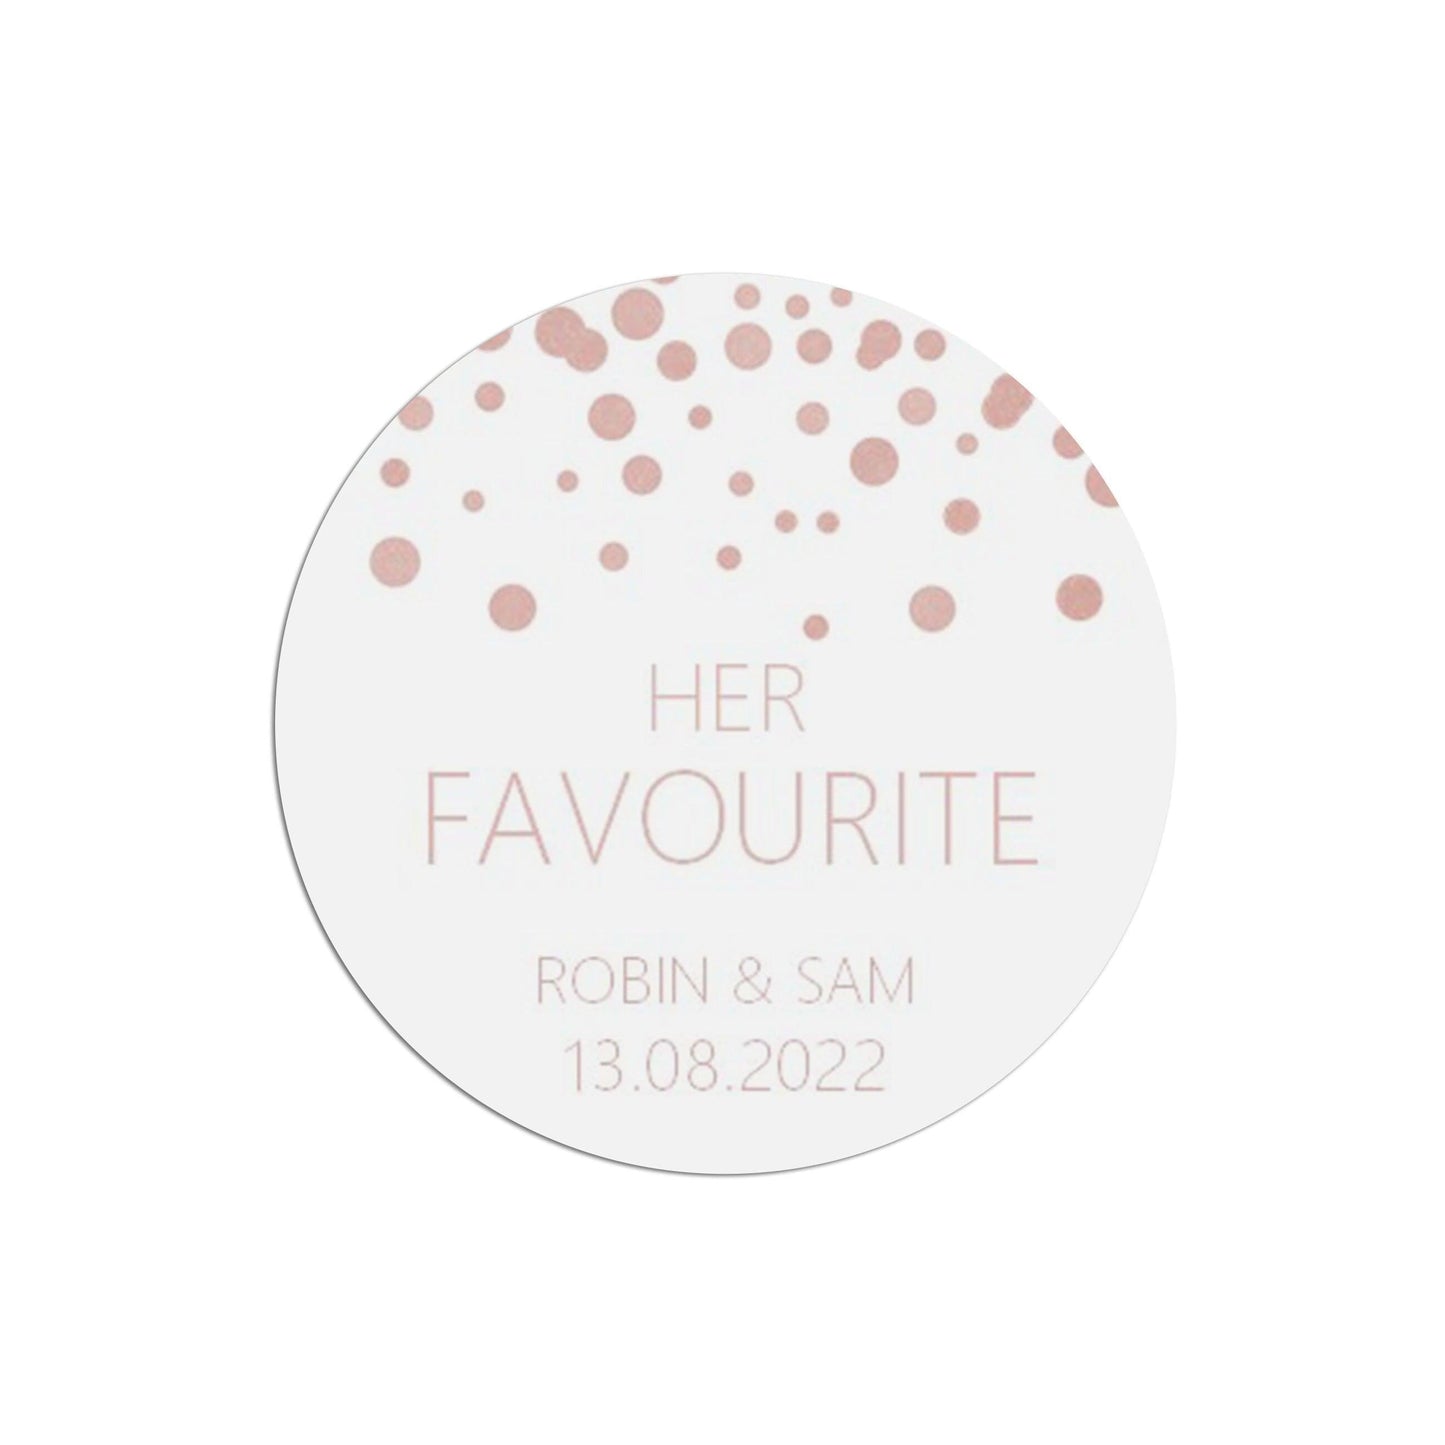  Her Favourite Wedding Stickers, Blush Confetti 37mm Round Personalised x 35 Stickers Per Sheet by PMPRINTED 